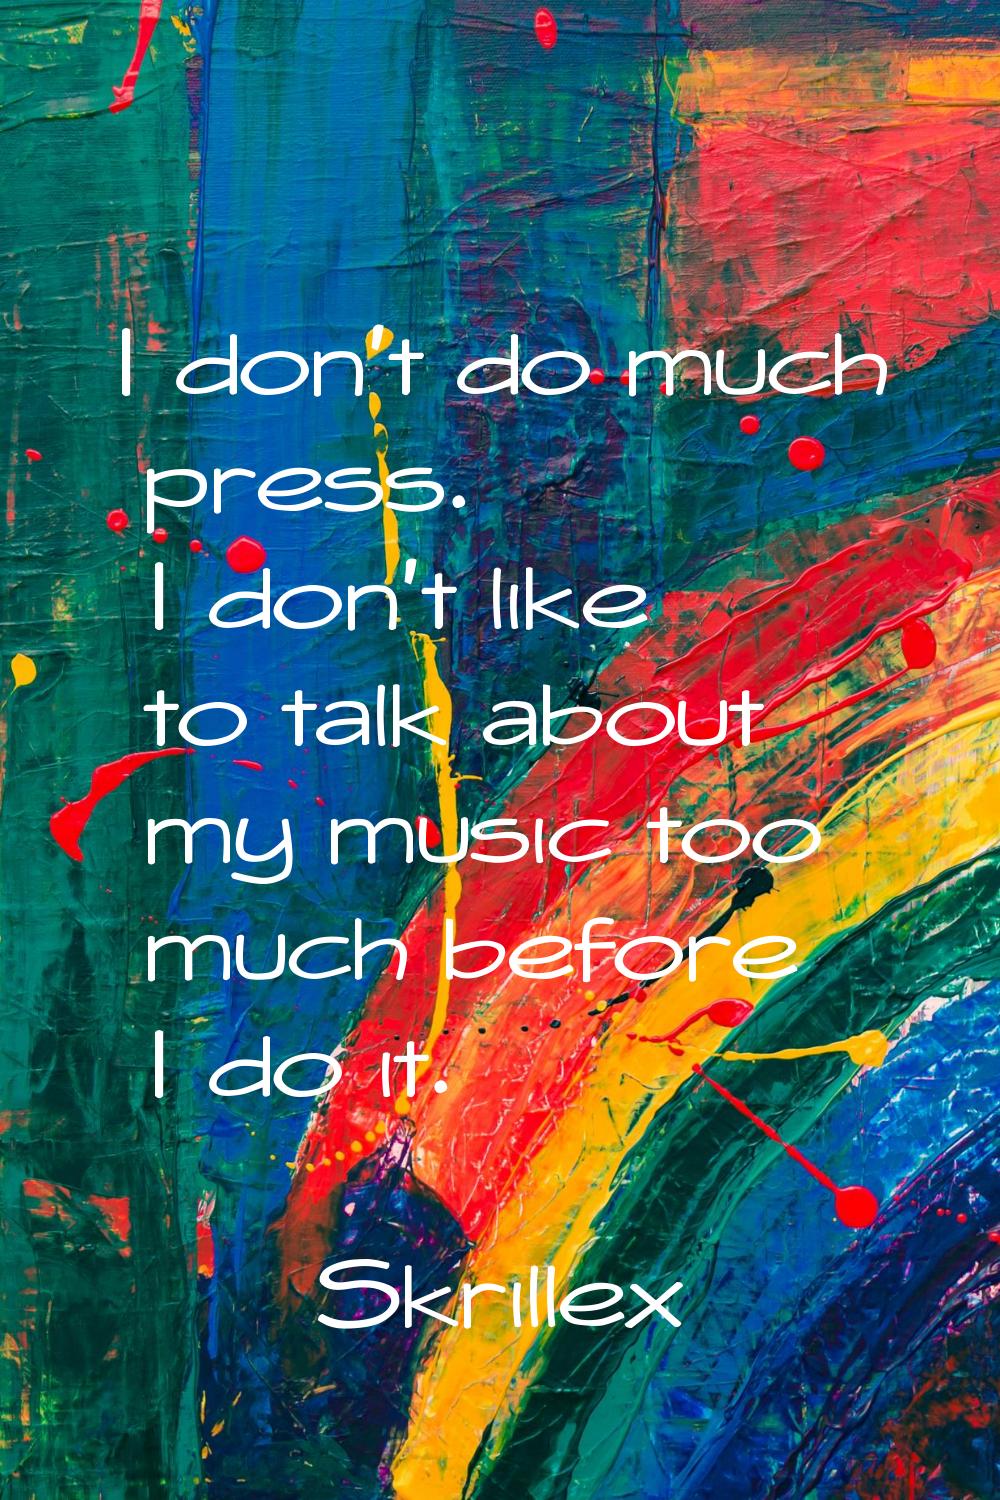 I don't do much press. I don't like to talk about my music too much before I do it.